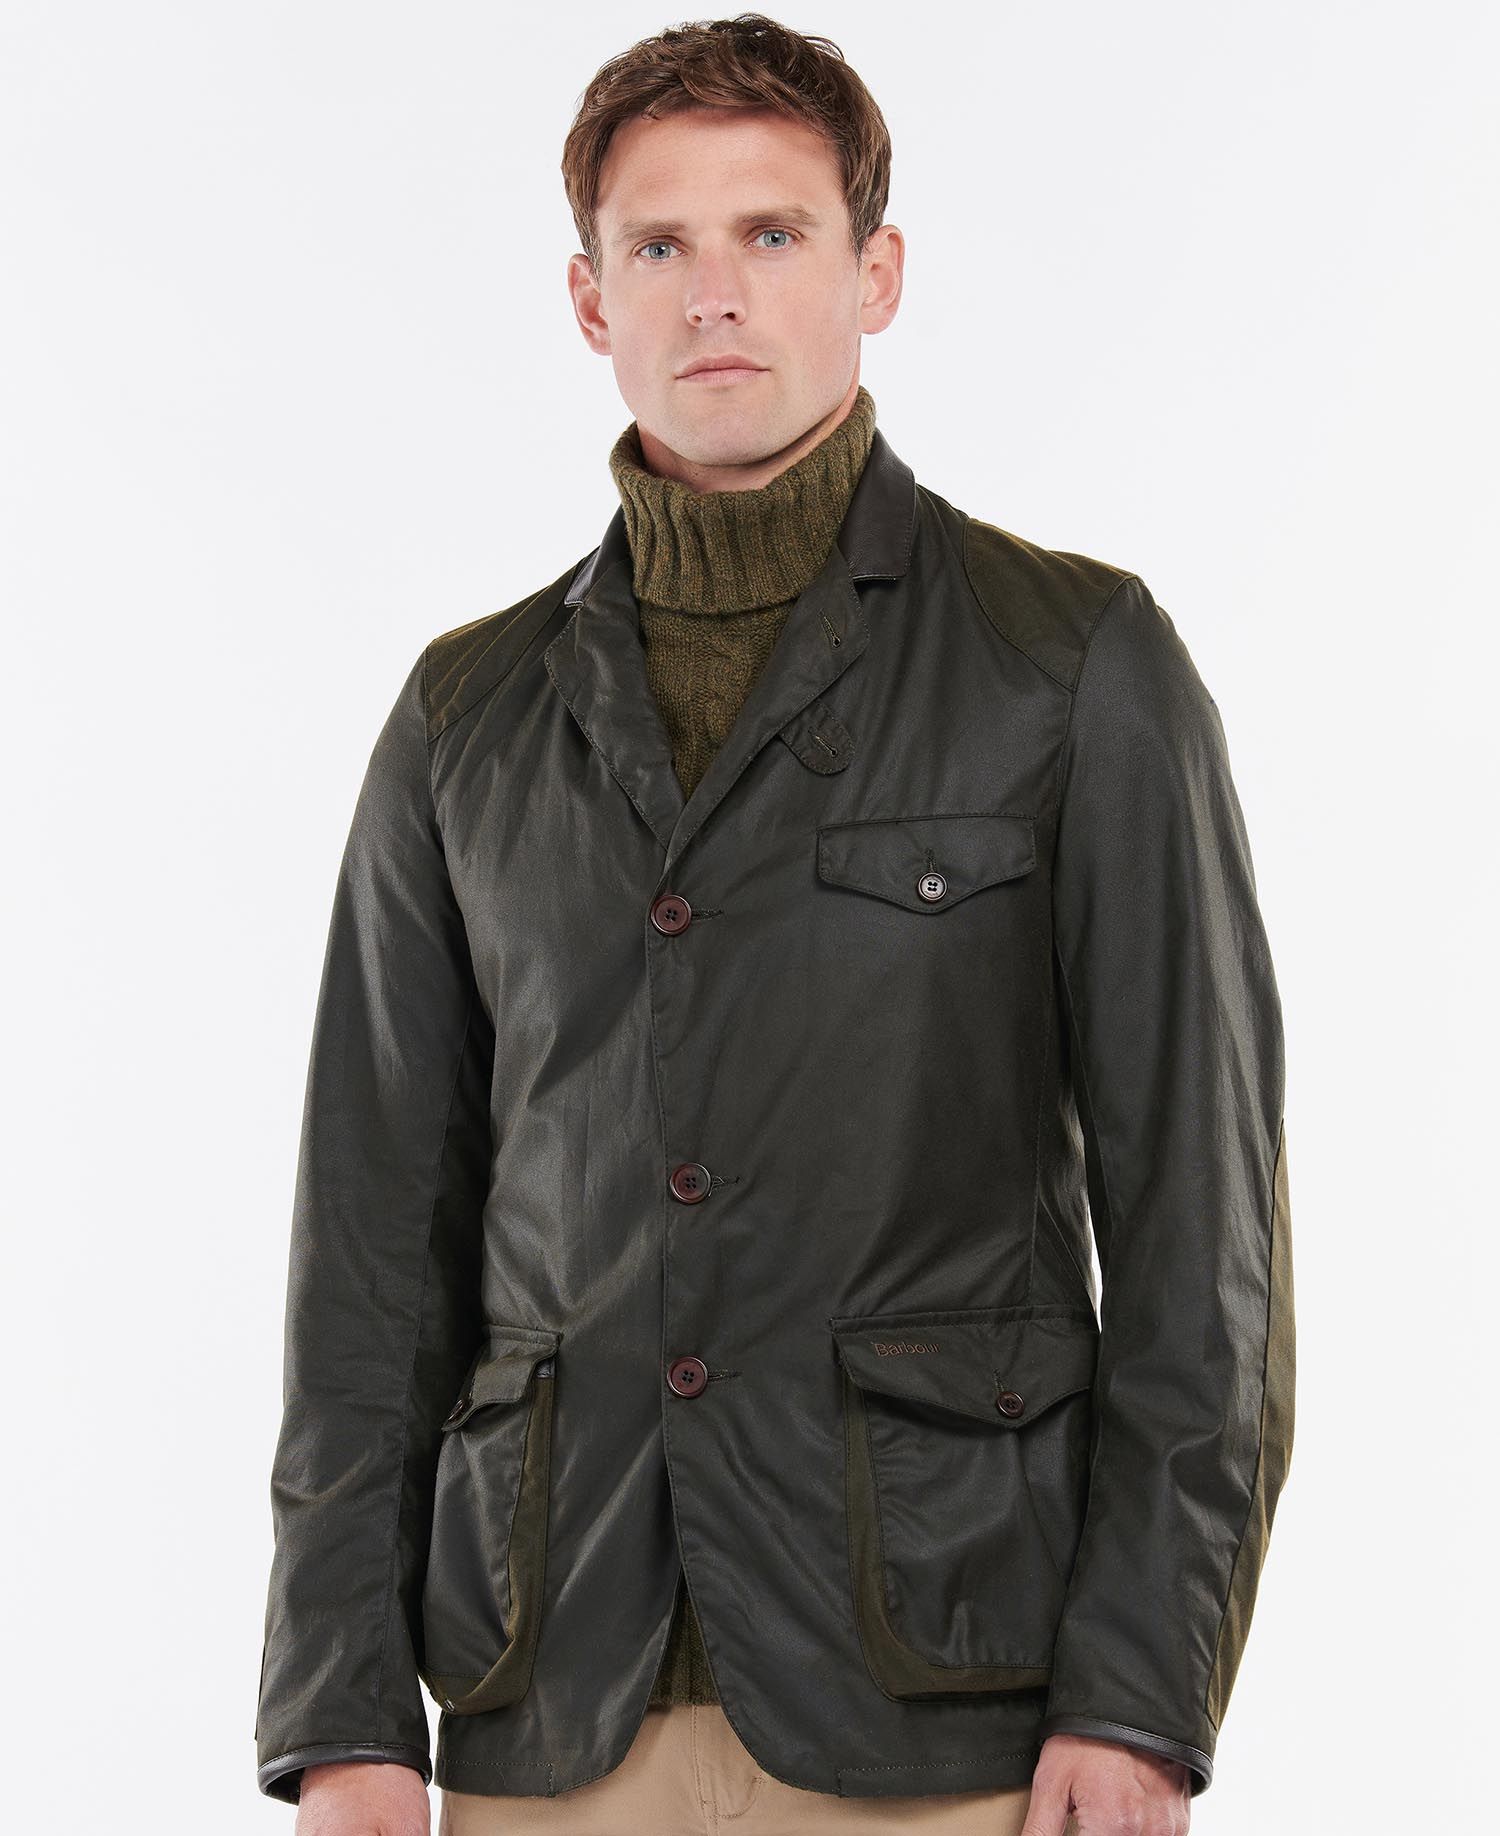 Men's Wax Jackets: A Guide to Barbour Jacket Styles | Barbour